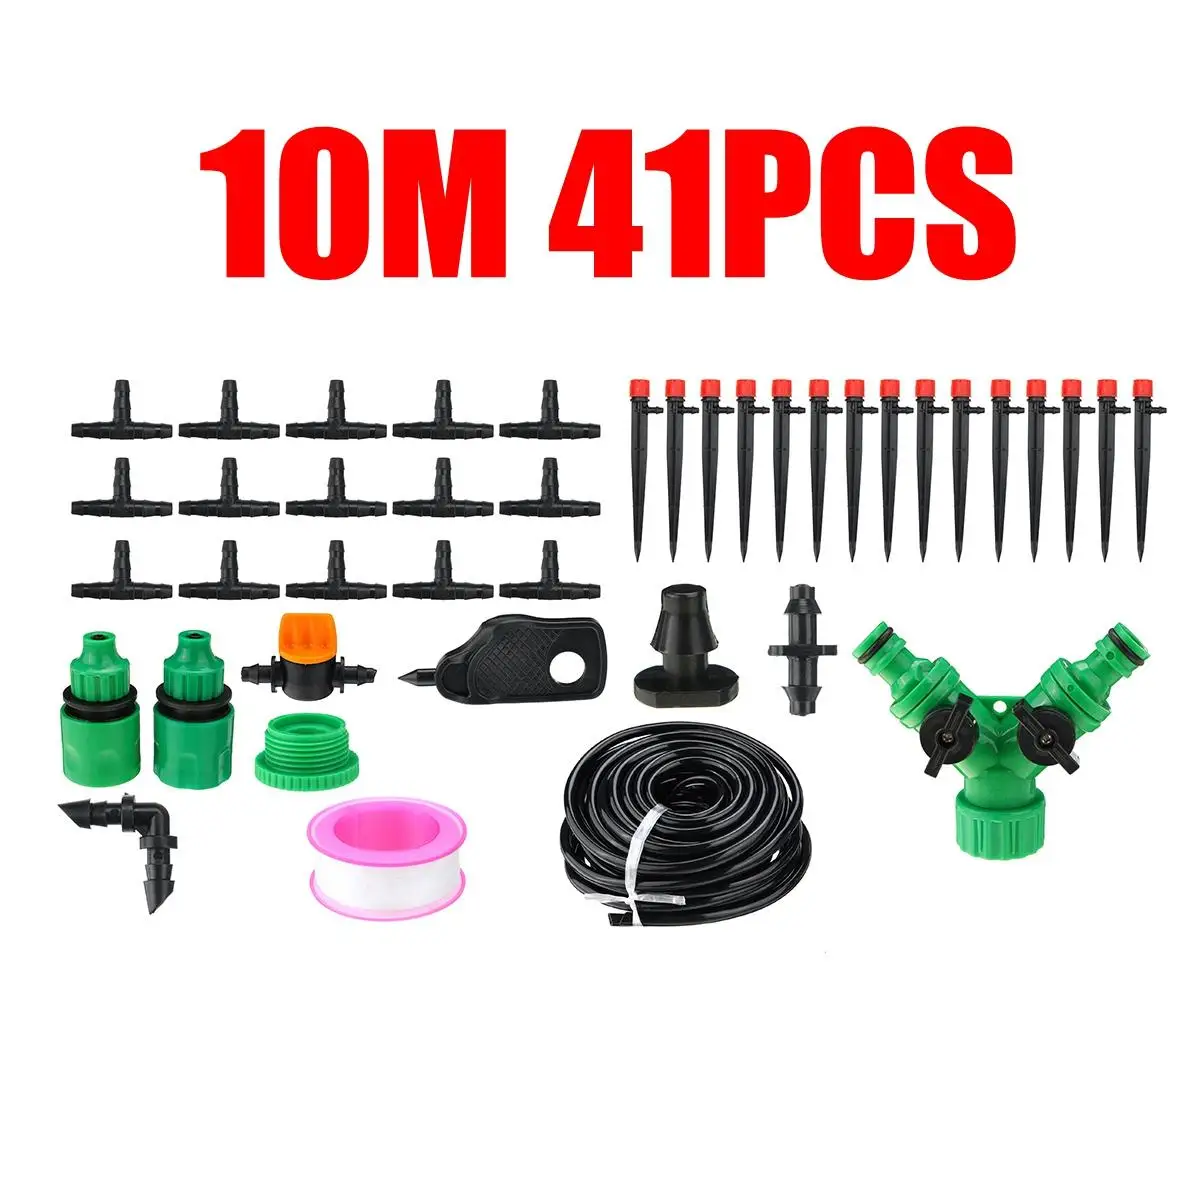 10-60M DIY Drip Irrigation System Automatic Watering Irrigation System Kit Garden Hose Micro Flow Drip Watering Kits Adjustable 